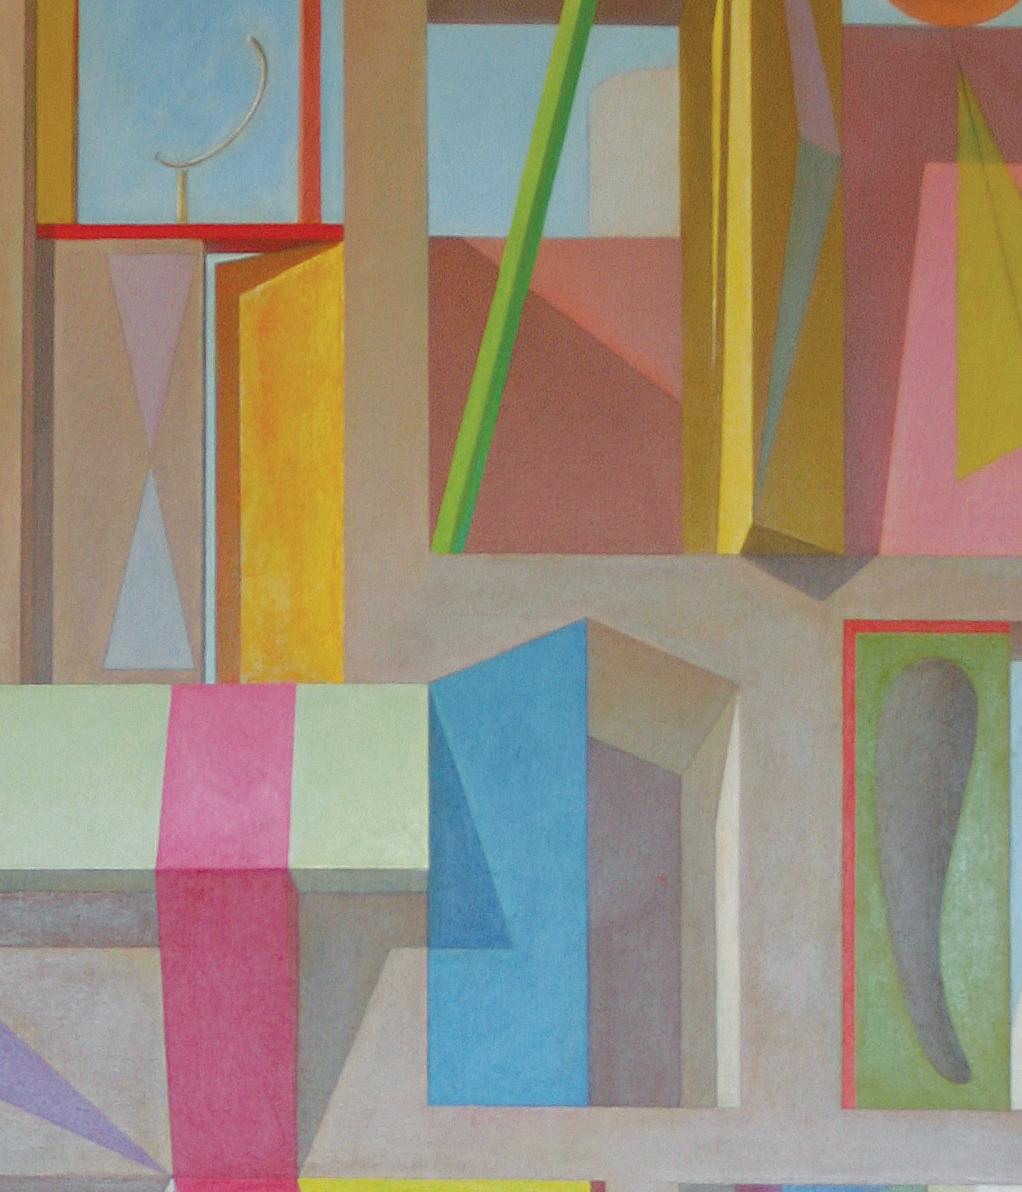 Architectural Fantasies, Abstract Geometric Forms in Color, Acrylic, 1981 - Painting by Joseph Amarotico